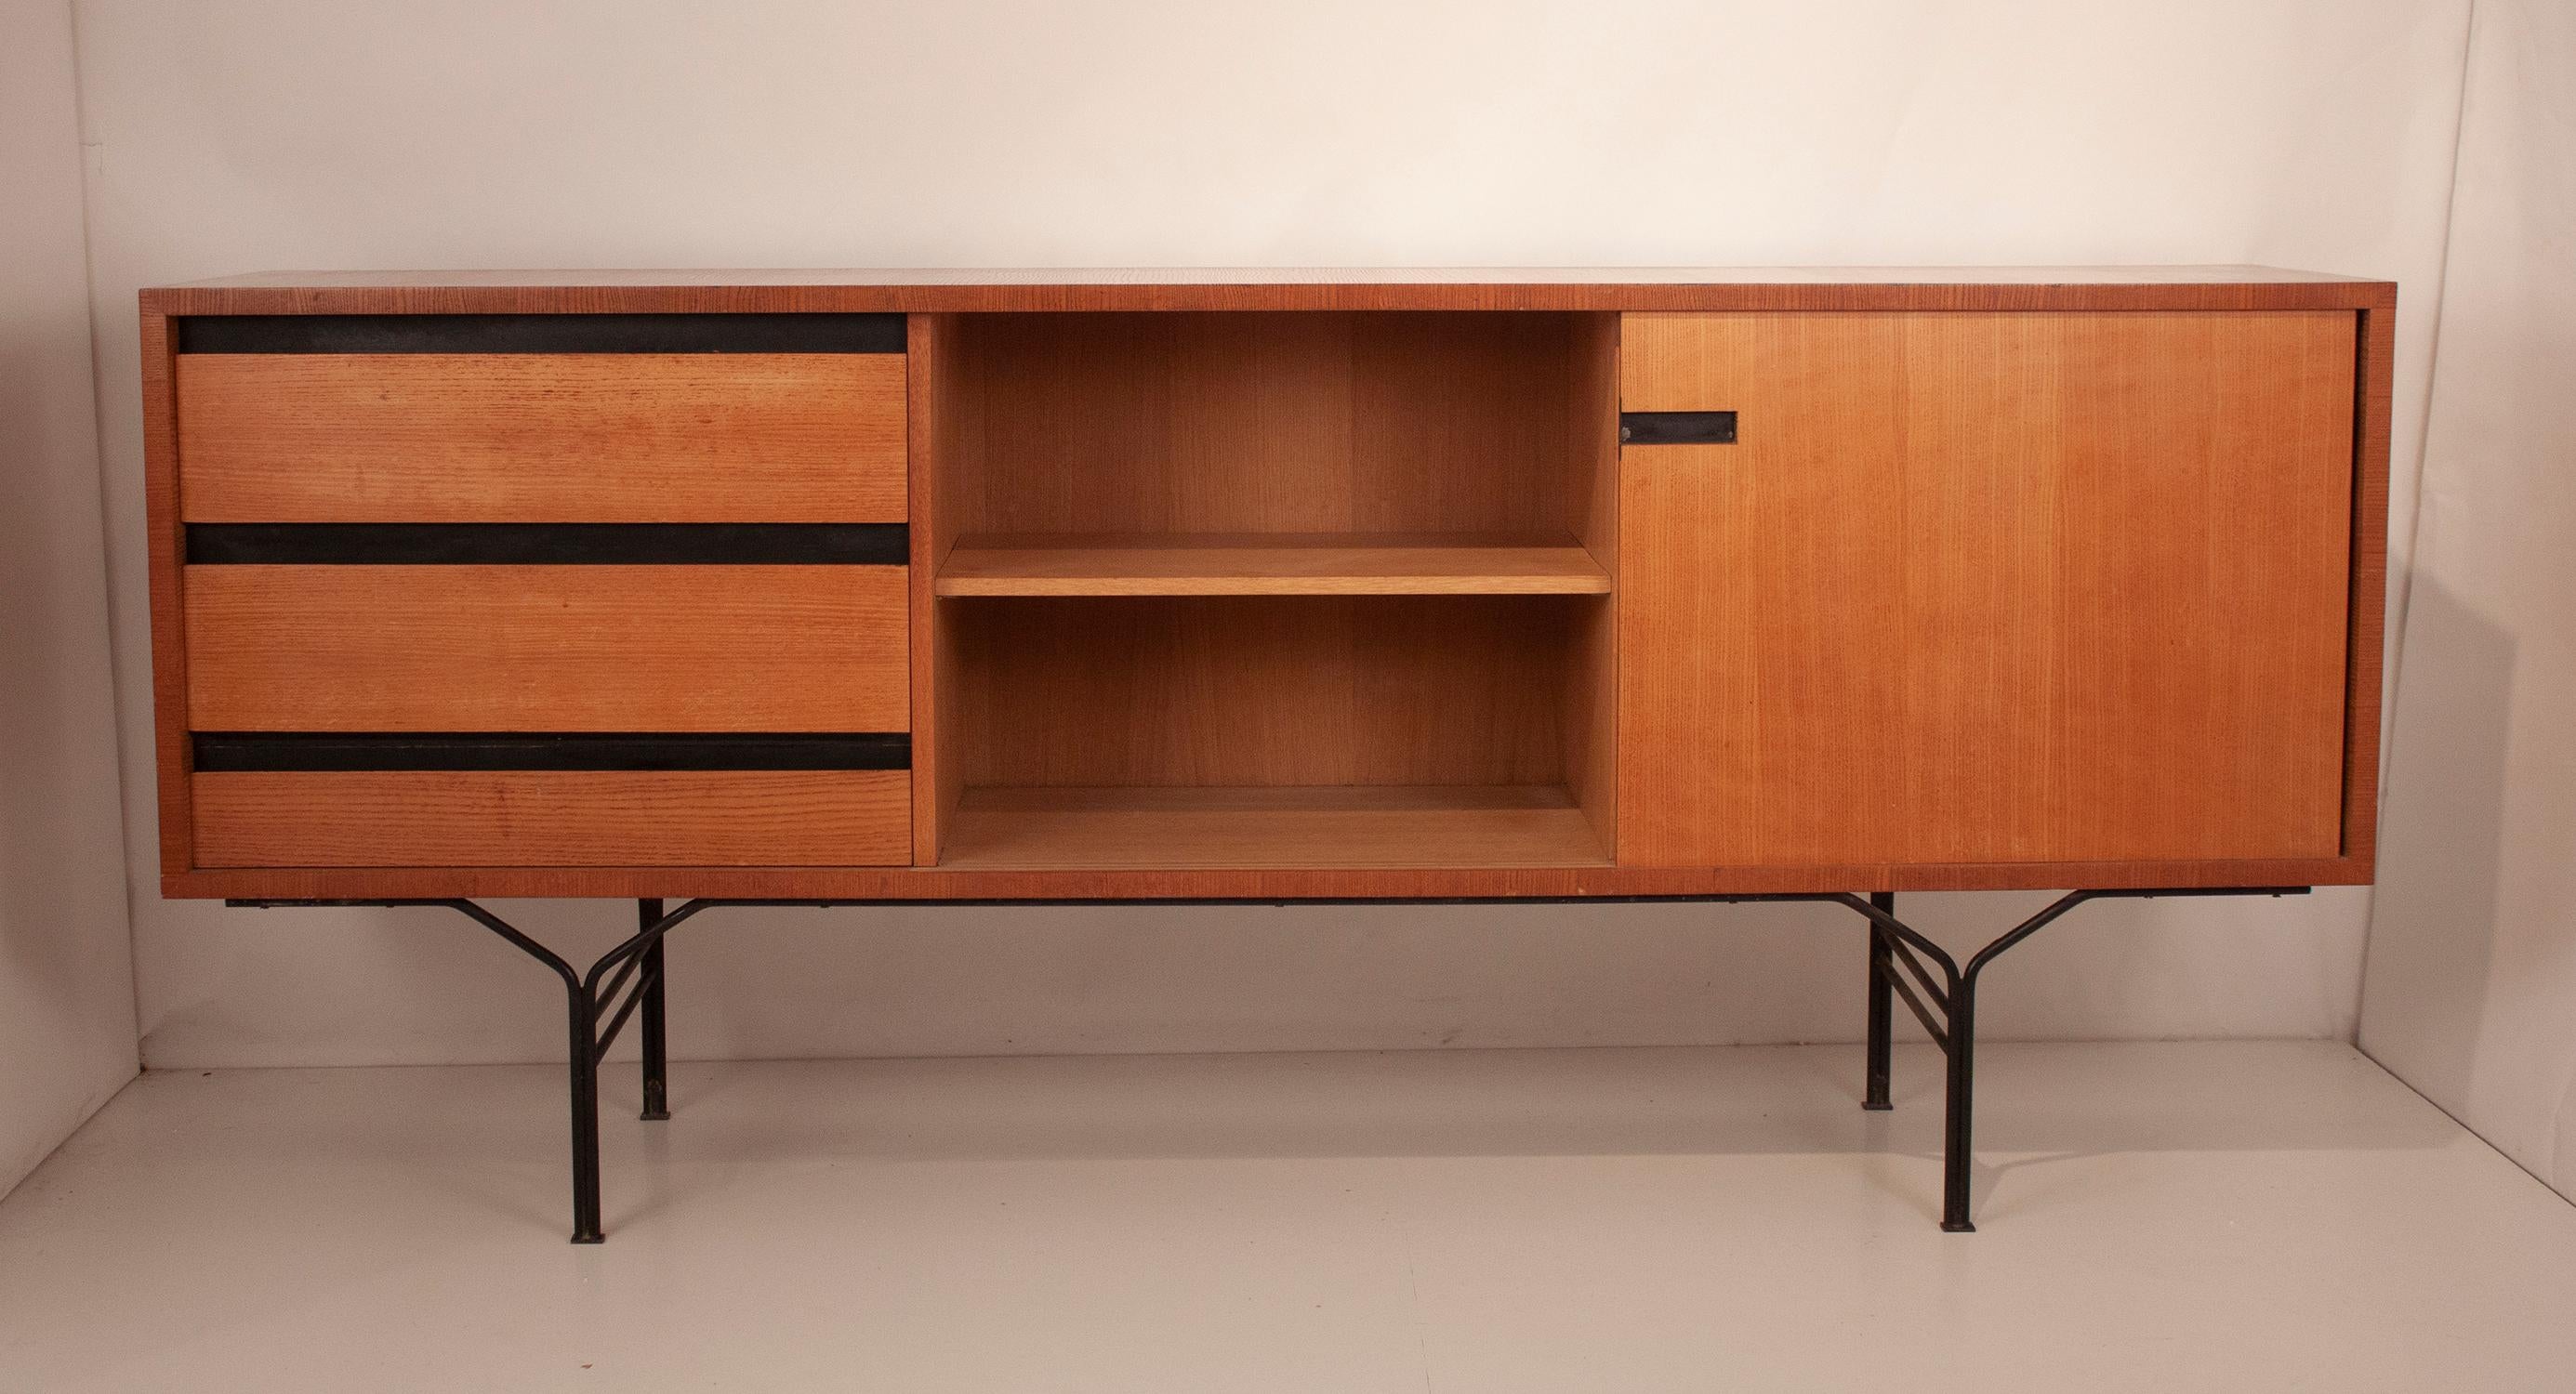 Wall unit by Gérard Guermonprez circa 1950
Sideboard by Gérard Guermonprez circa 1950, Ermenonville model, published by Magnani. The ash veneer structure opens with two sliding doors and a flap. The design of the black lacquered metal base is